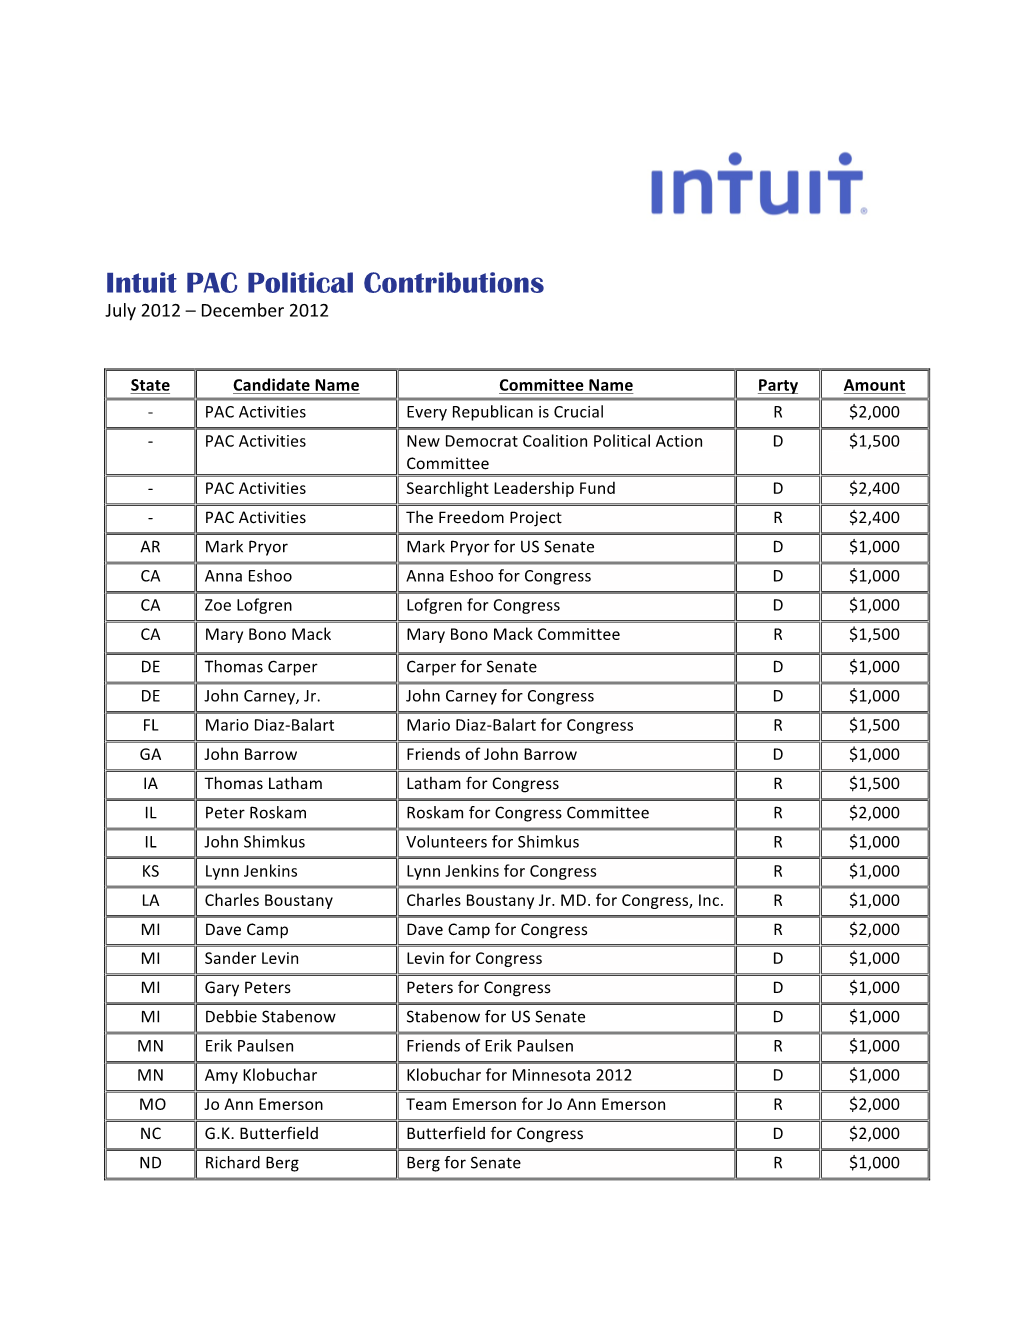 Intuit PAC Contributions July 2012